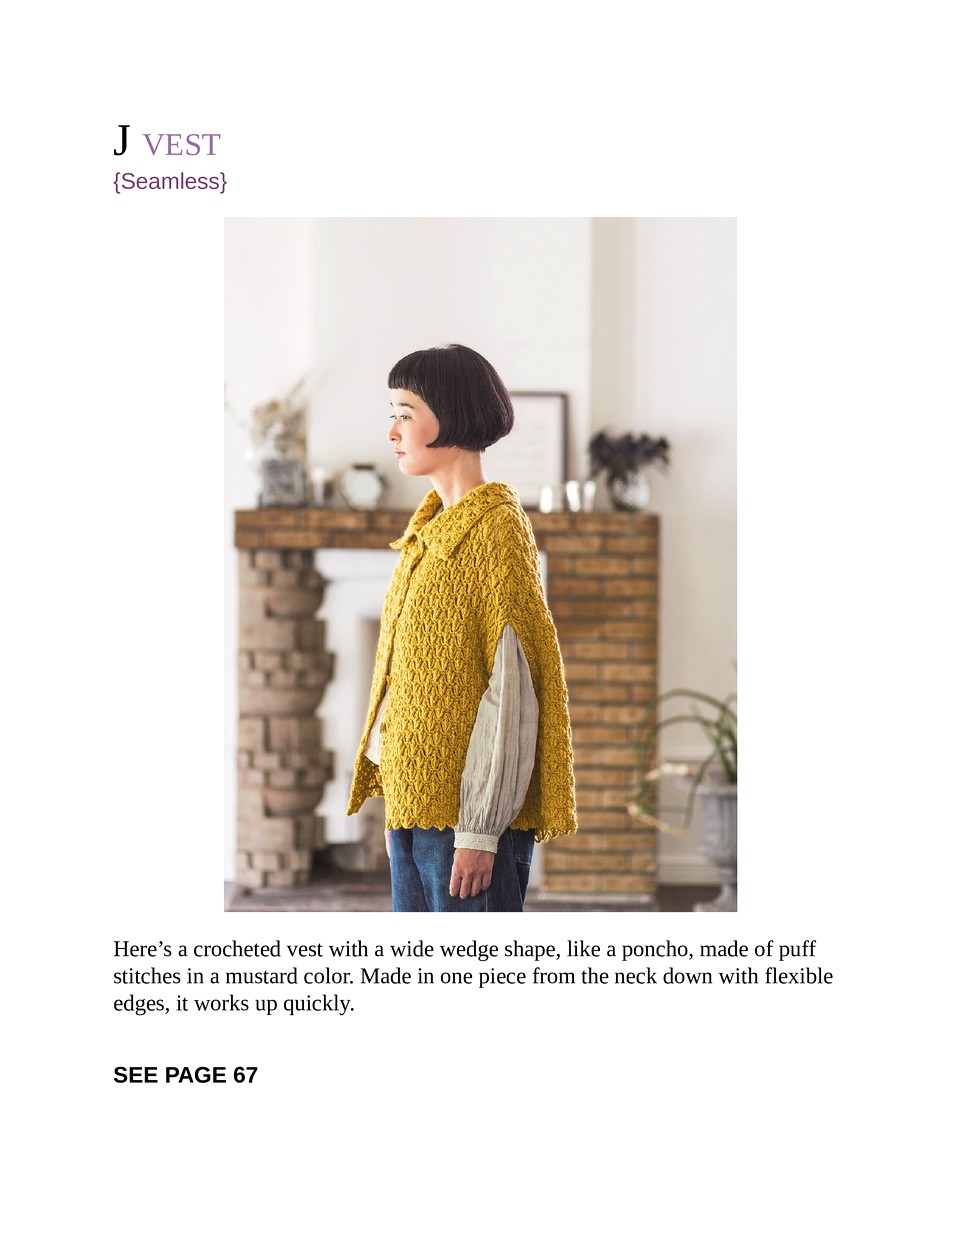 Japanese Knitting Patterns for Sweaters Scarves and More-47